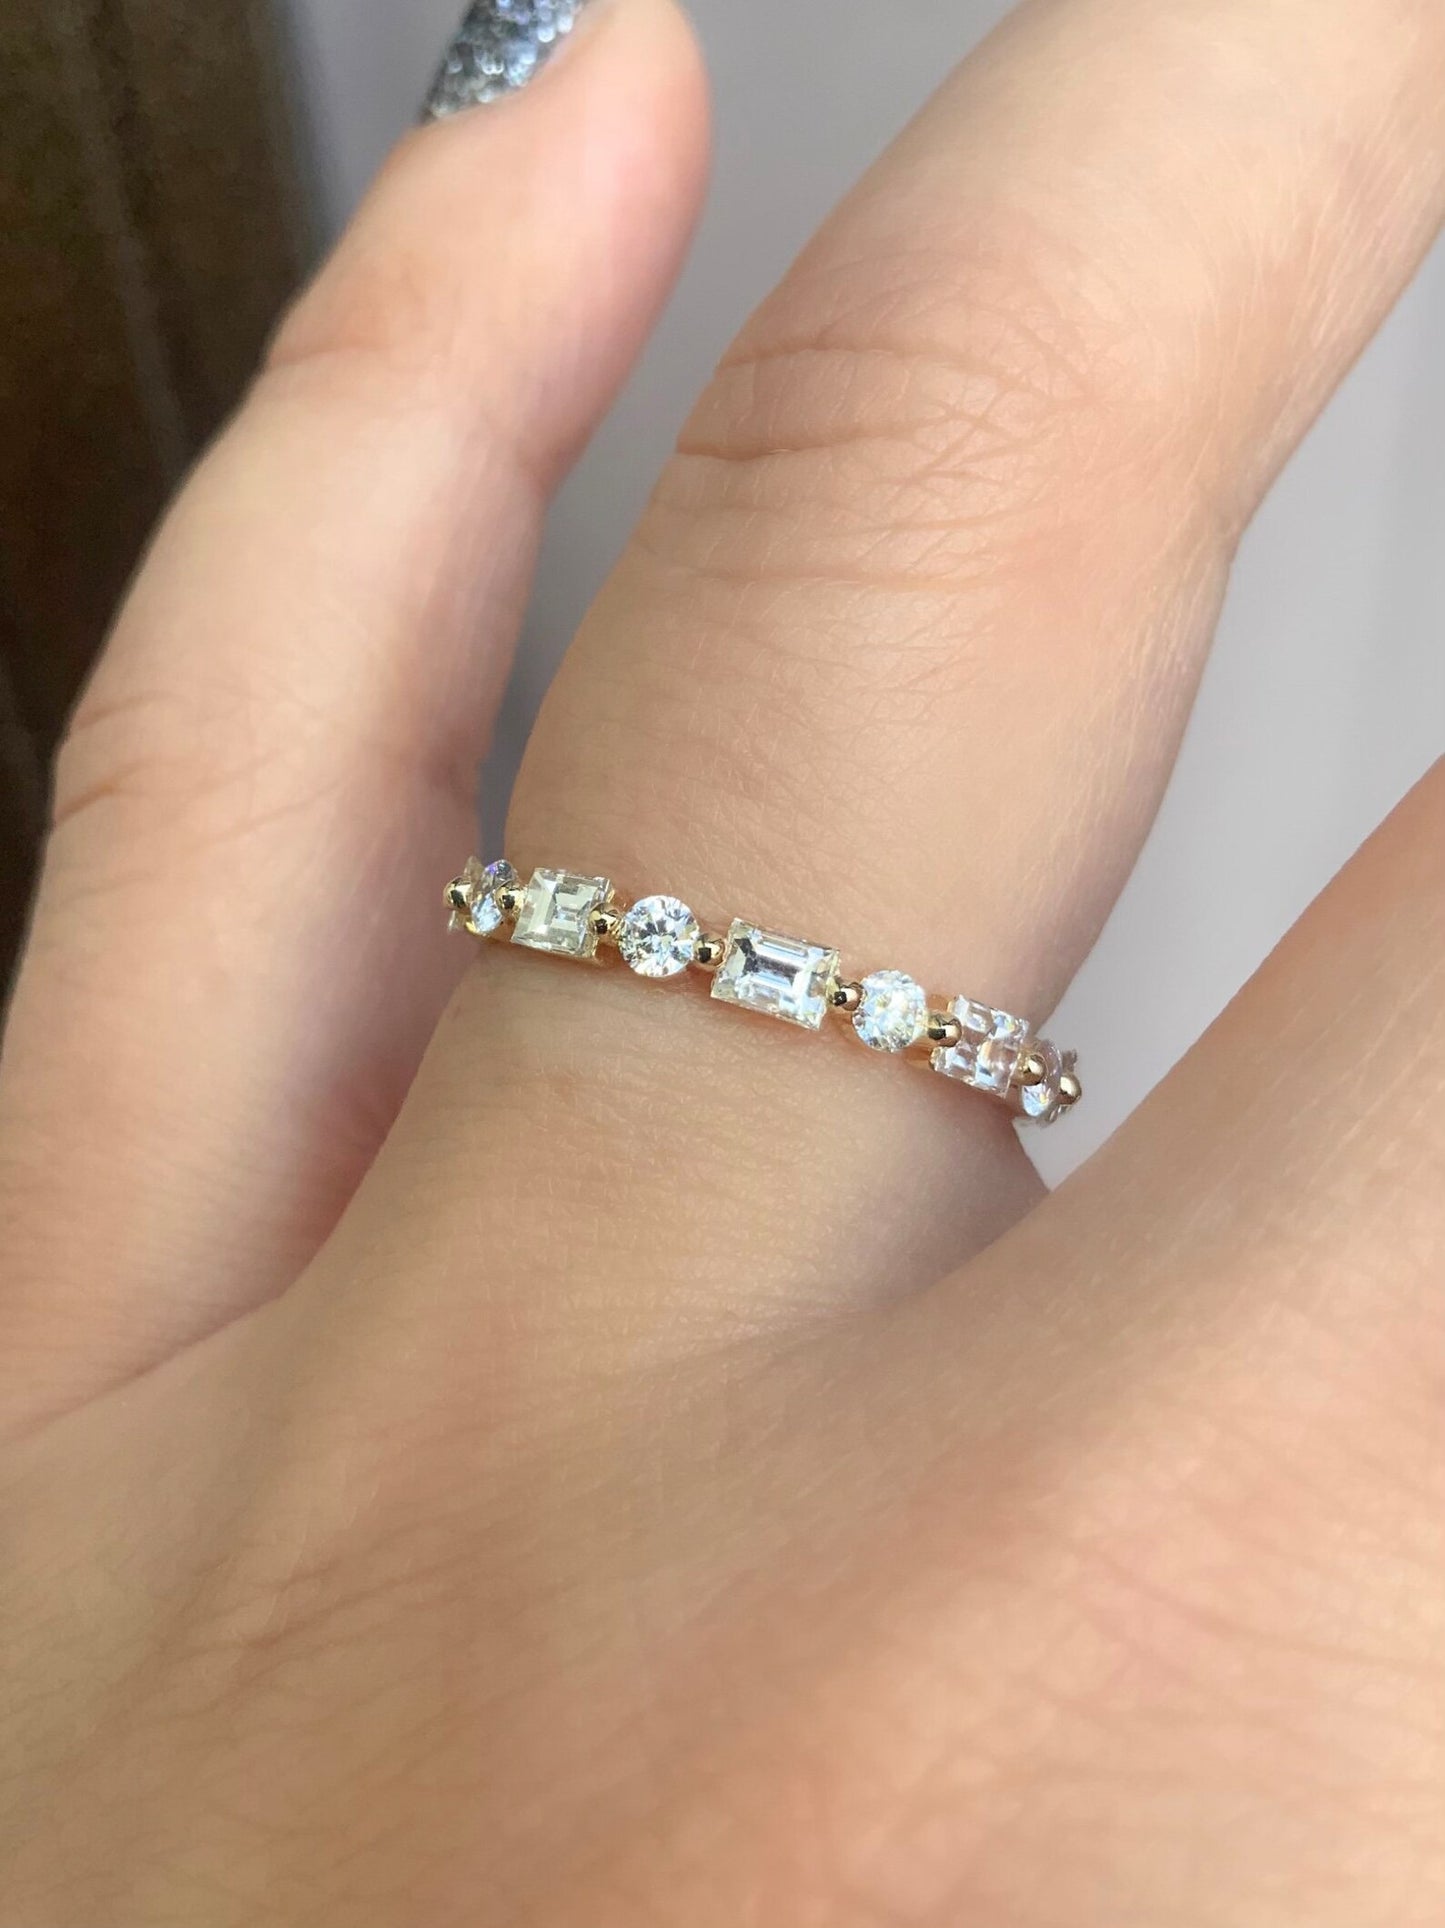 Baguette Round Natural Diamond Full Eternity Band/ 2.5mm Single Prong Dot Dash Diamond Ring/ Gold or Platinum Baguette Dot Band with Appraisal